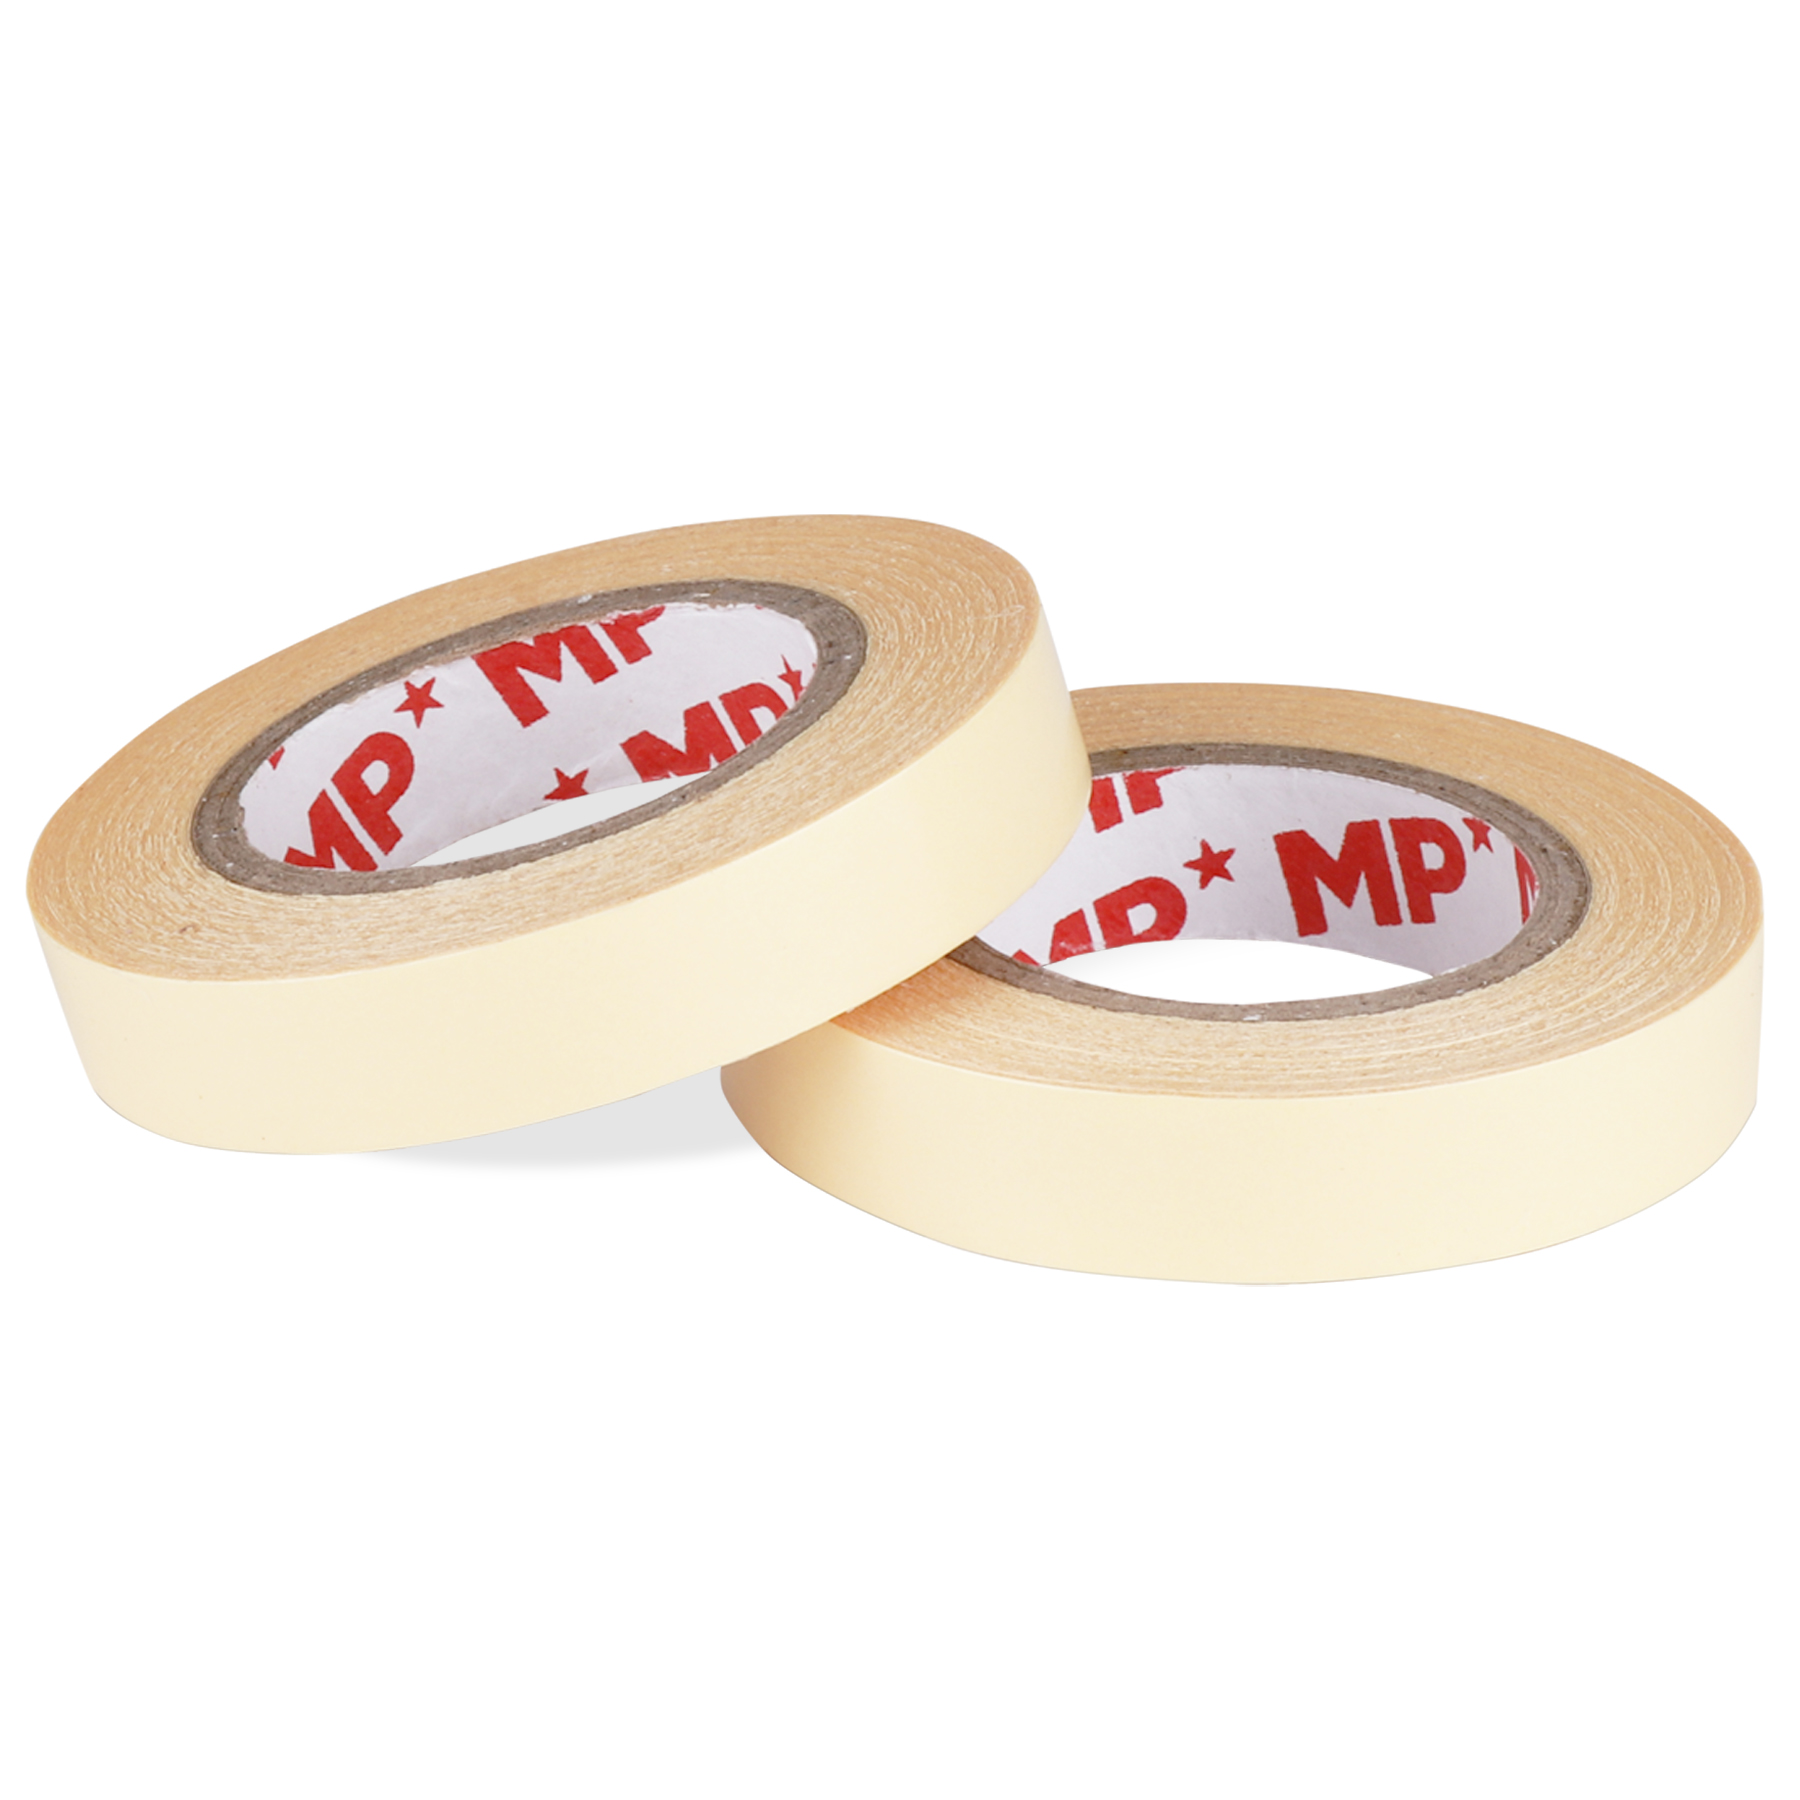 PA512-01 Double-Sided Adhesive Cream Tape, 12mm×10m